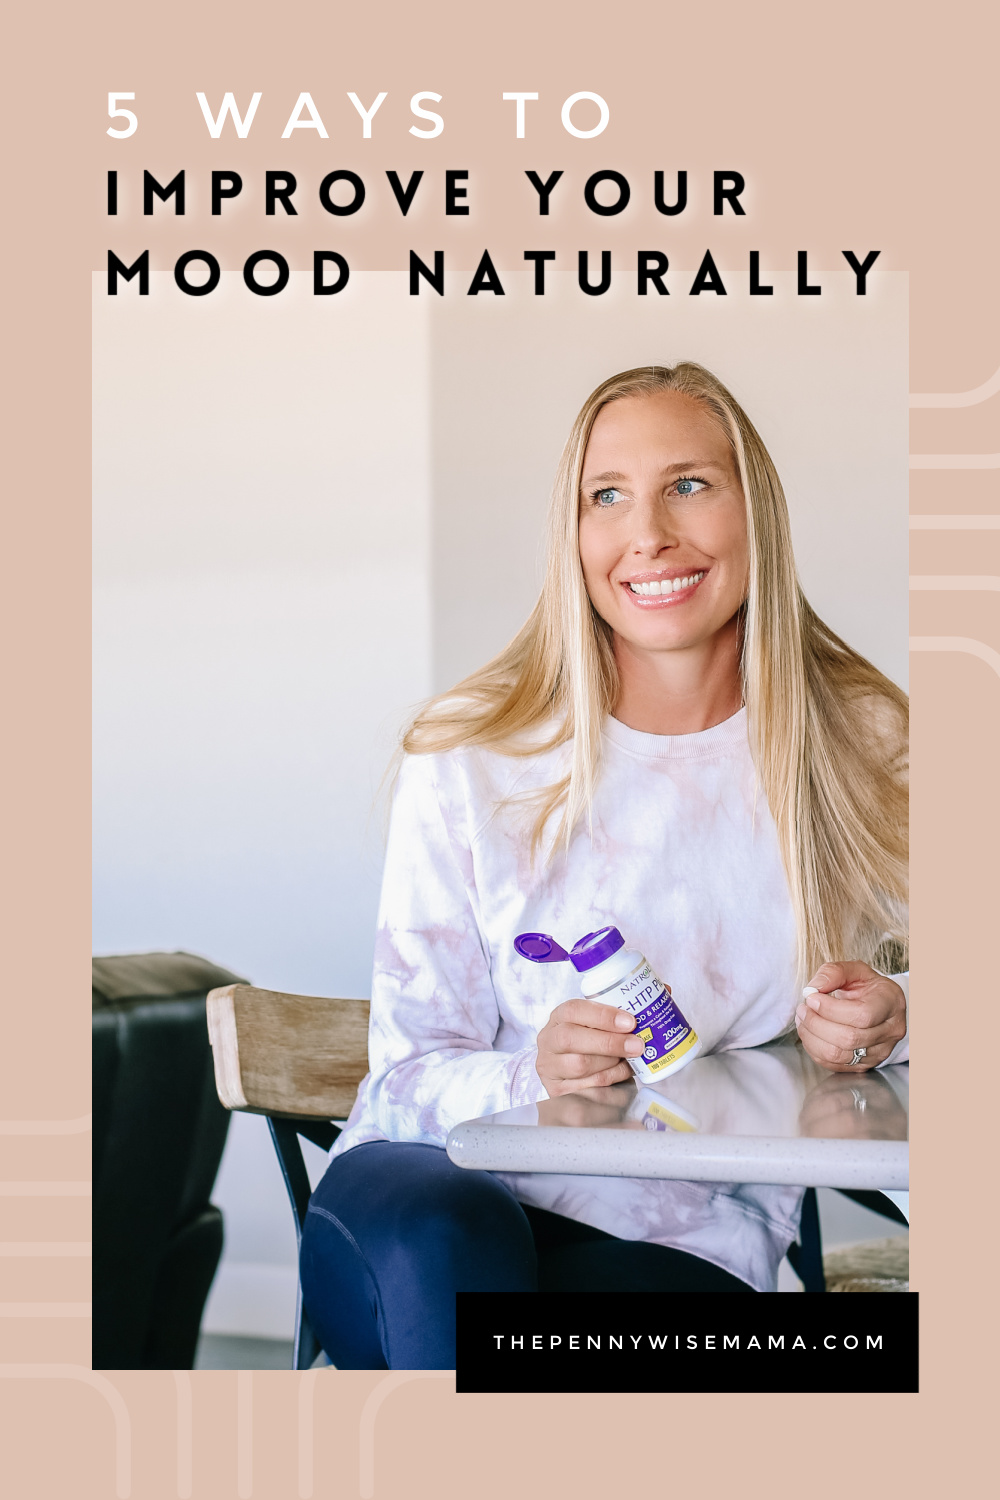 With the holidays right around the corner, now is the time to take care of your mental health. Check out these simple tips to help improve your mood naturally + see how to save $4 on Natrol 5-HTP Plus at Costco